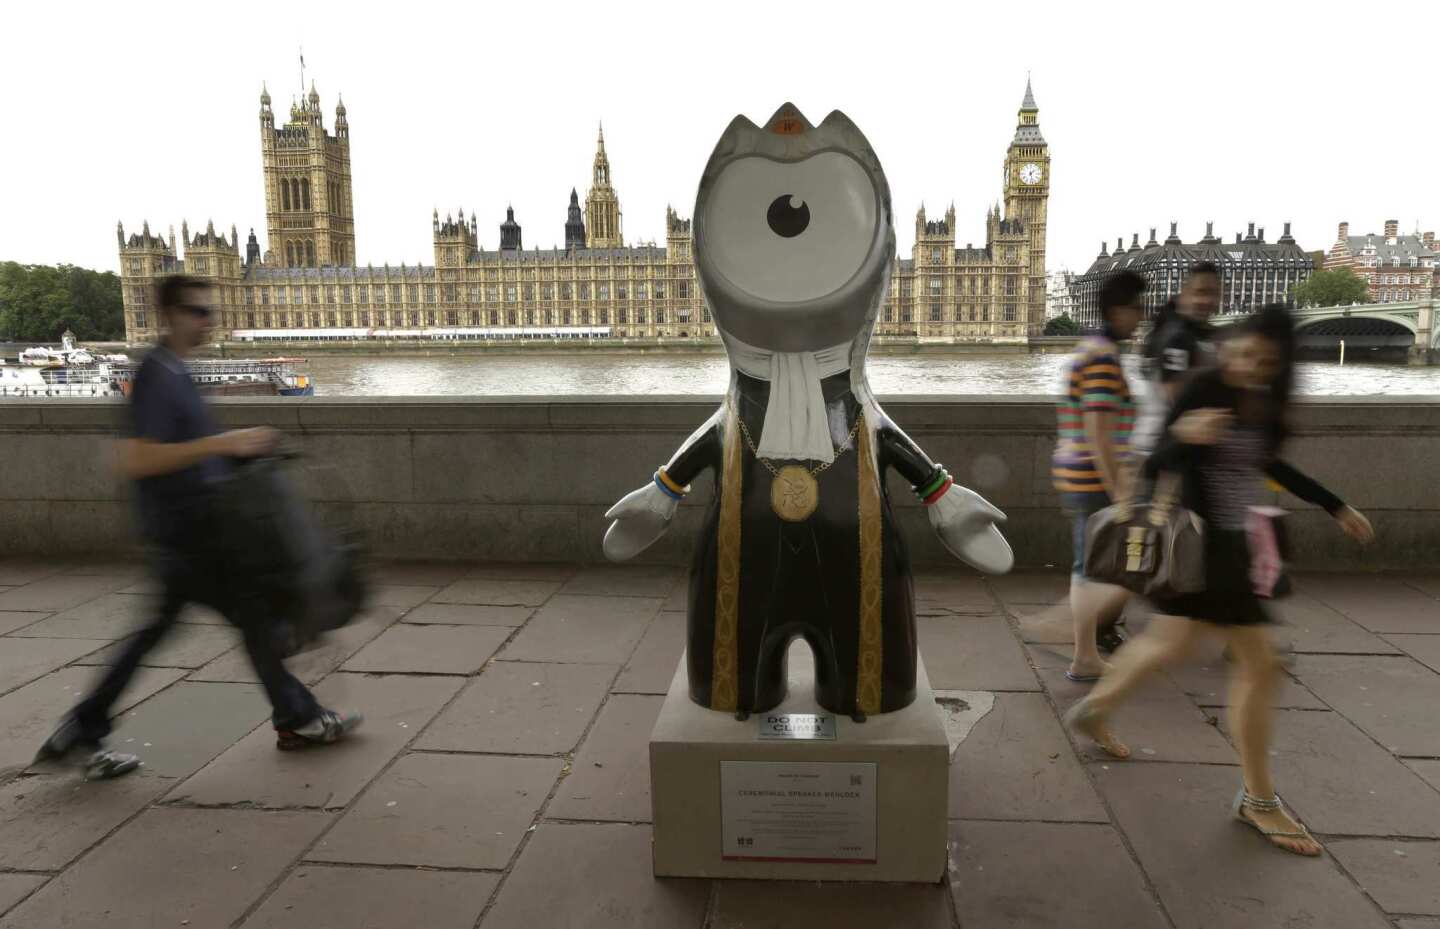 Ceremonial Speaker Wenlock in front of the Palace of Westminster